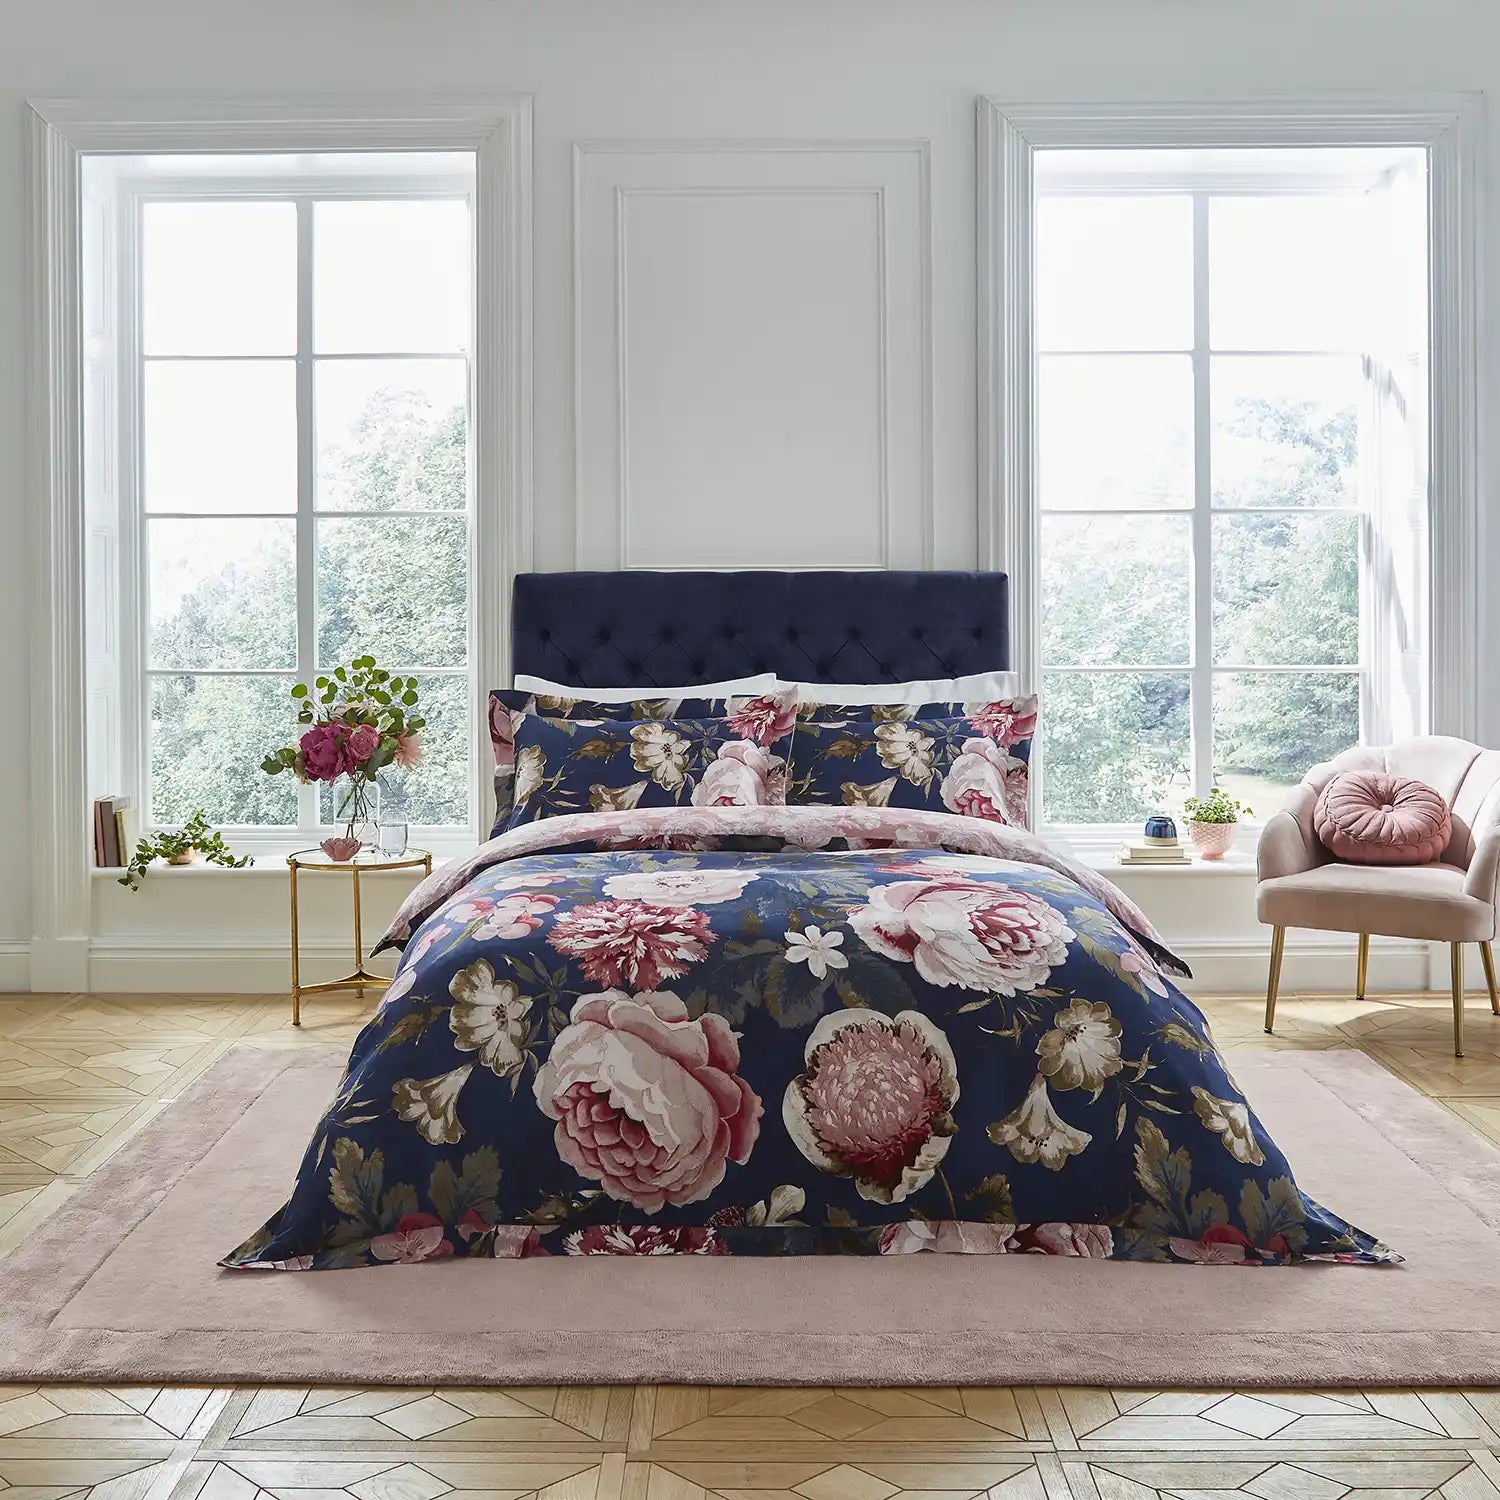  Dorma 300 Thread Count Pure Cotton Sateen Constance Floral Duvet Cover - Navy Floral 1 Shaws Department Stores